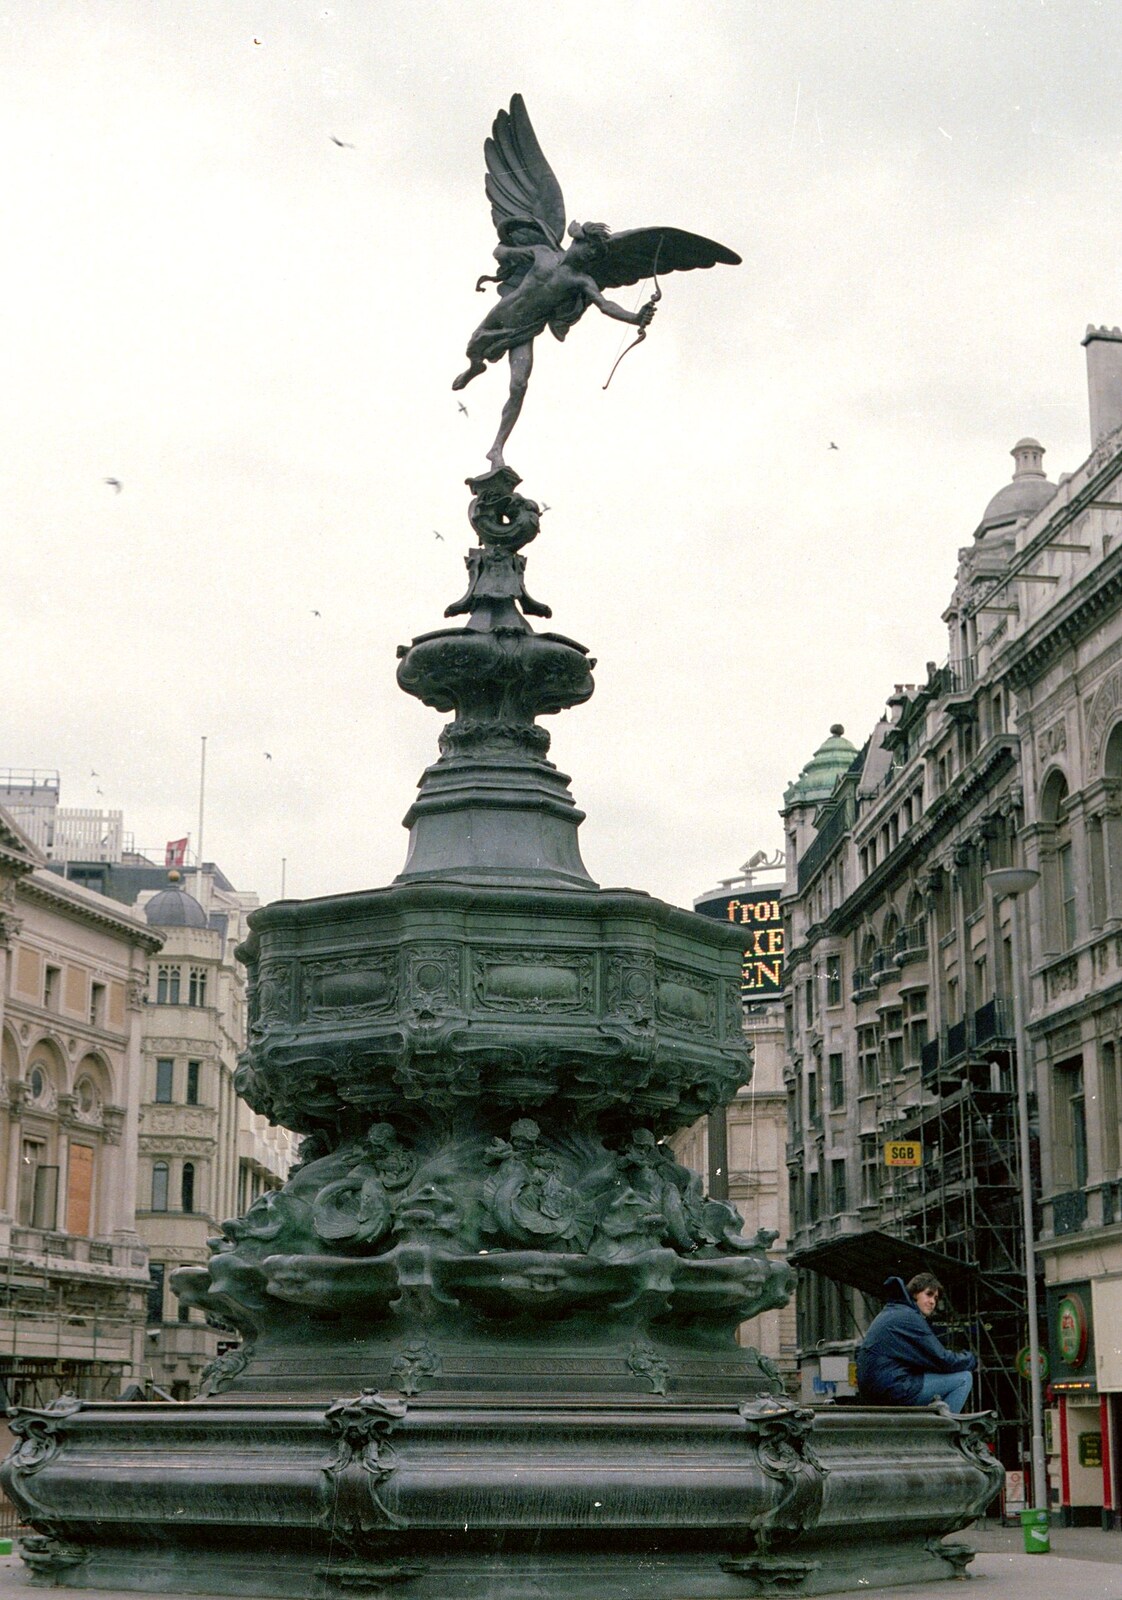 The statue of Eros in Picadilly Circus from Grape Picking and the Trip Back to Poly, Bransgore and London - 20th September 1986